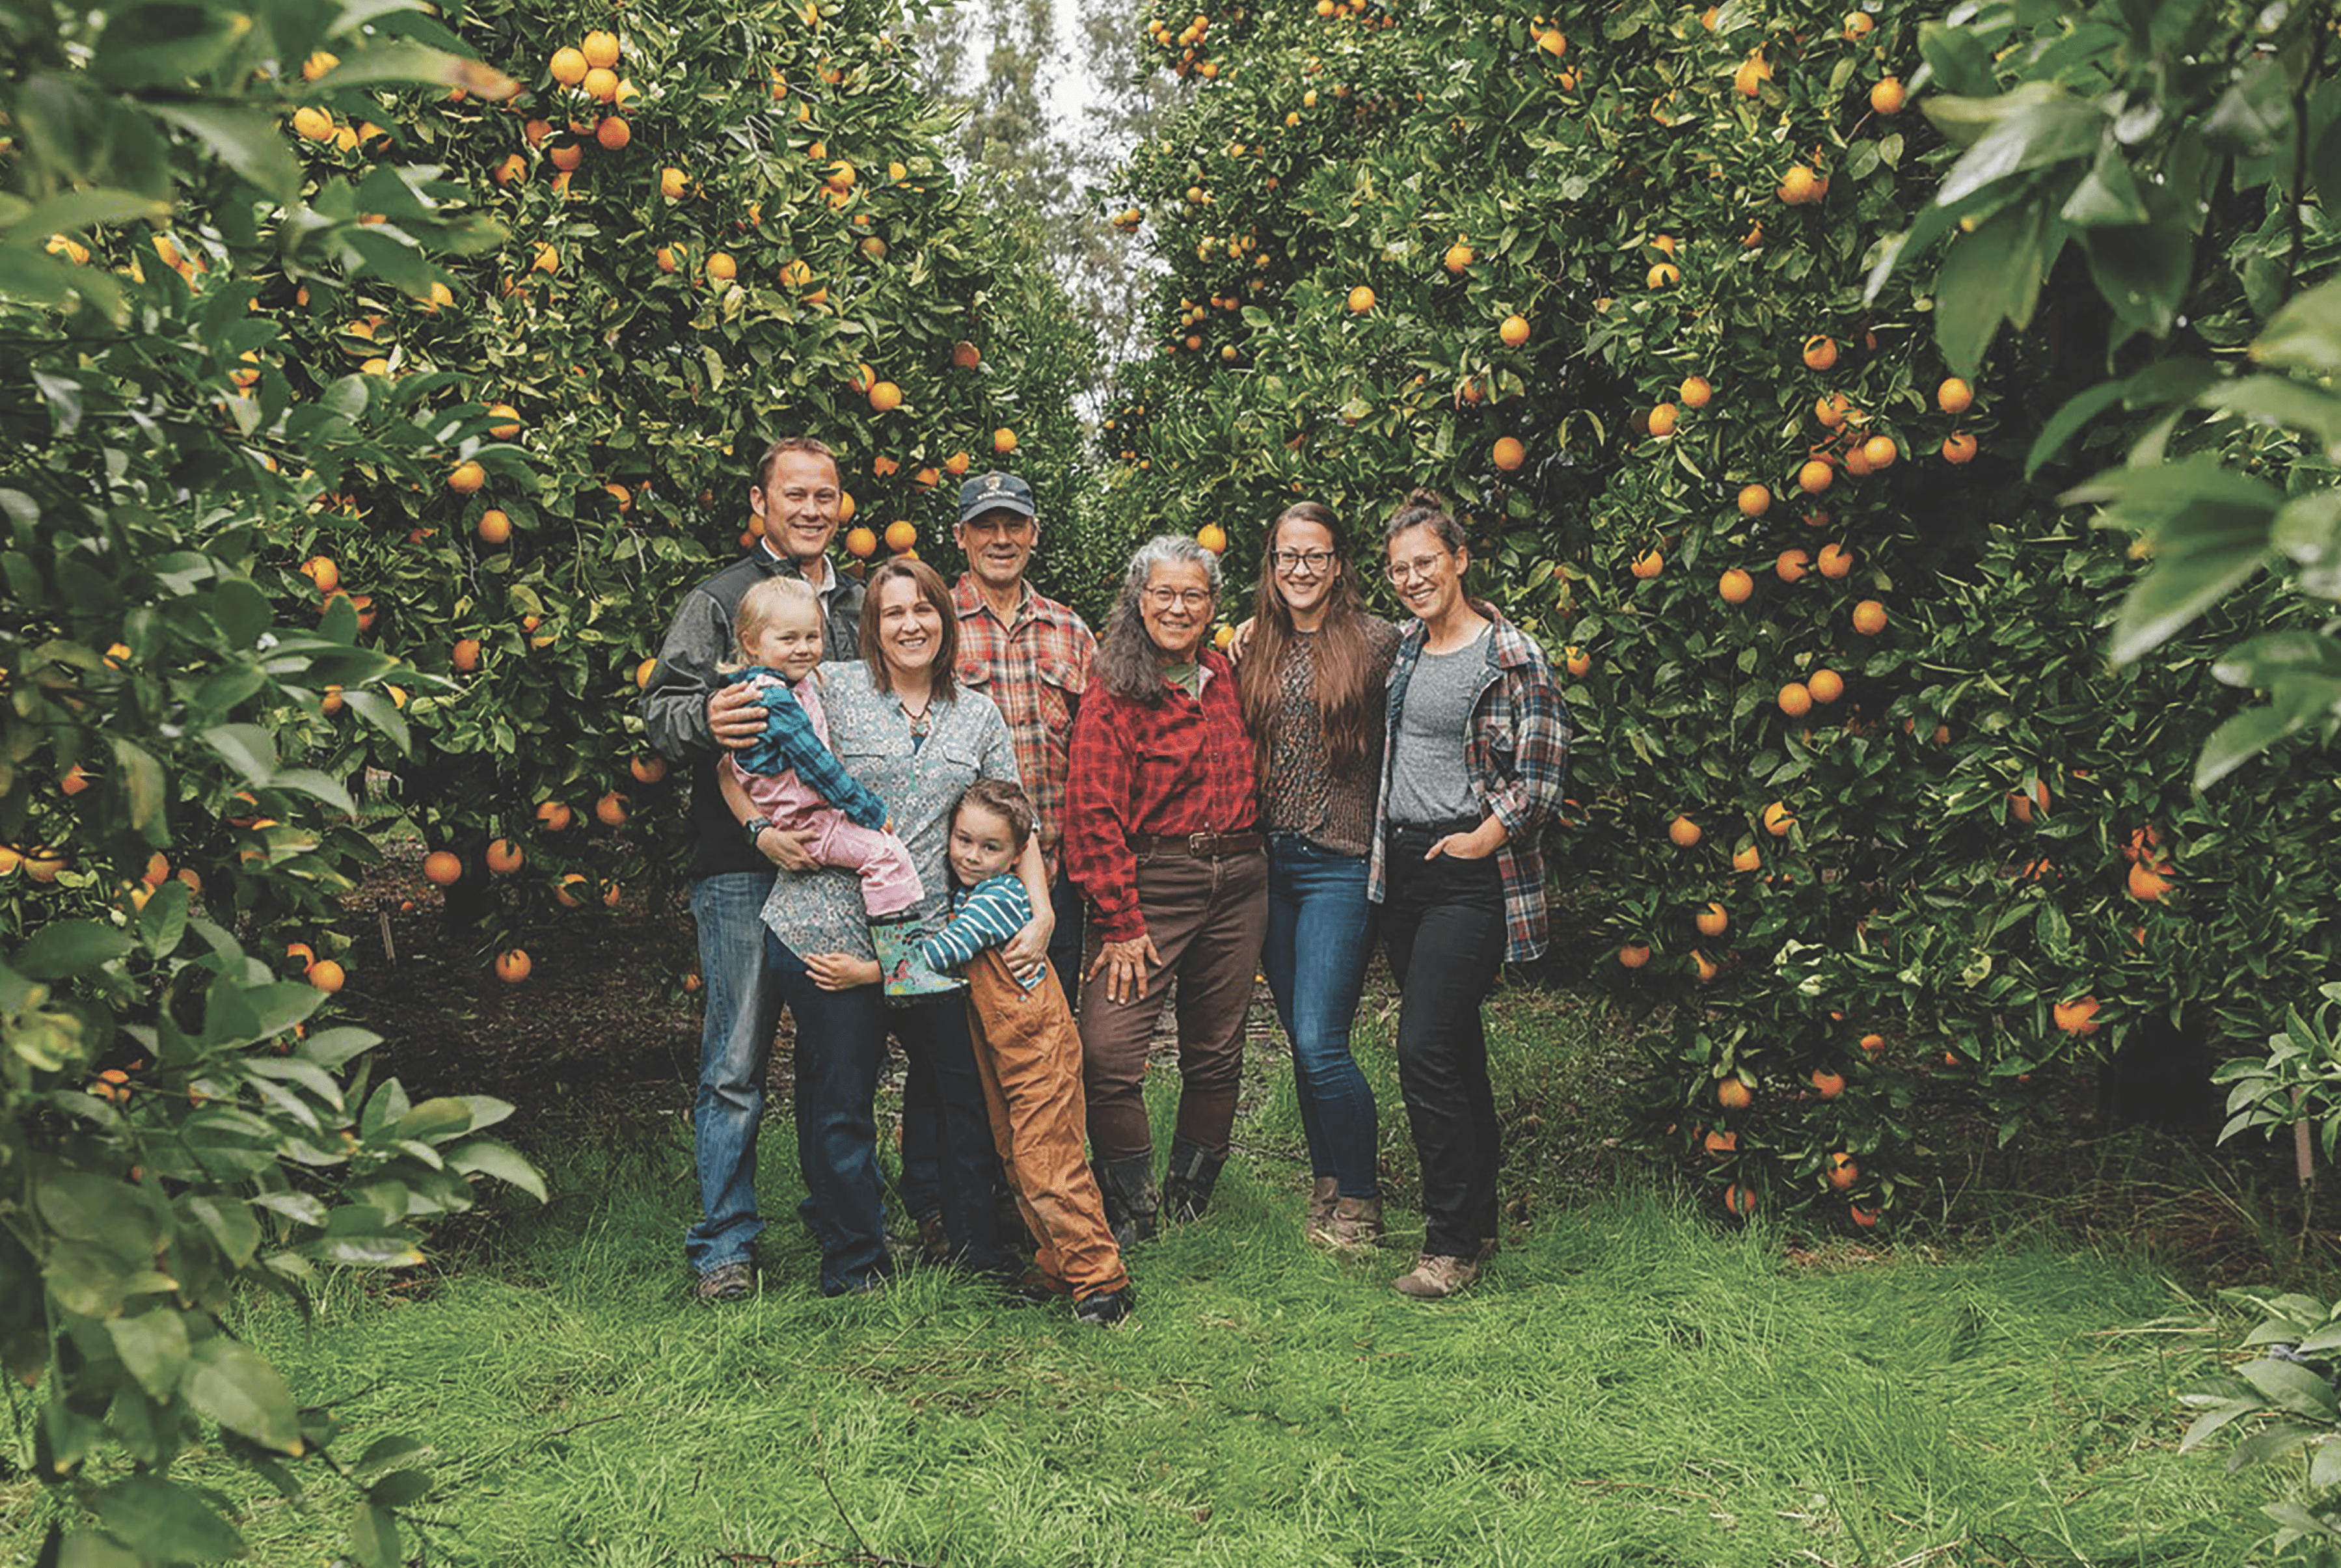 The Main family poses in their citrus grove on the Good Humus property. From left, son Zachary Main, and his wife, Nicole, and their children, Nolan and Zoe; Jeff and Annie Main; and daughters, Claire and Alison. (Photo by Raoul Ortega)